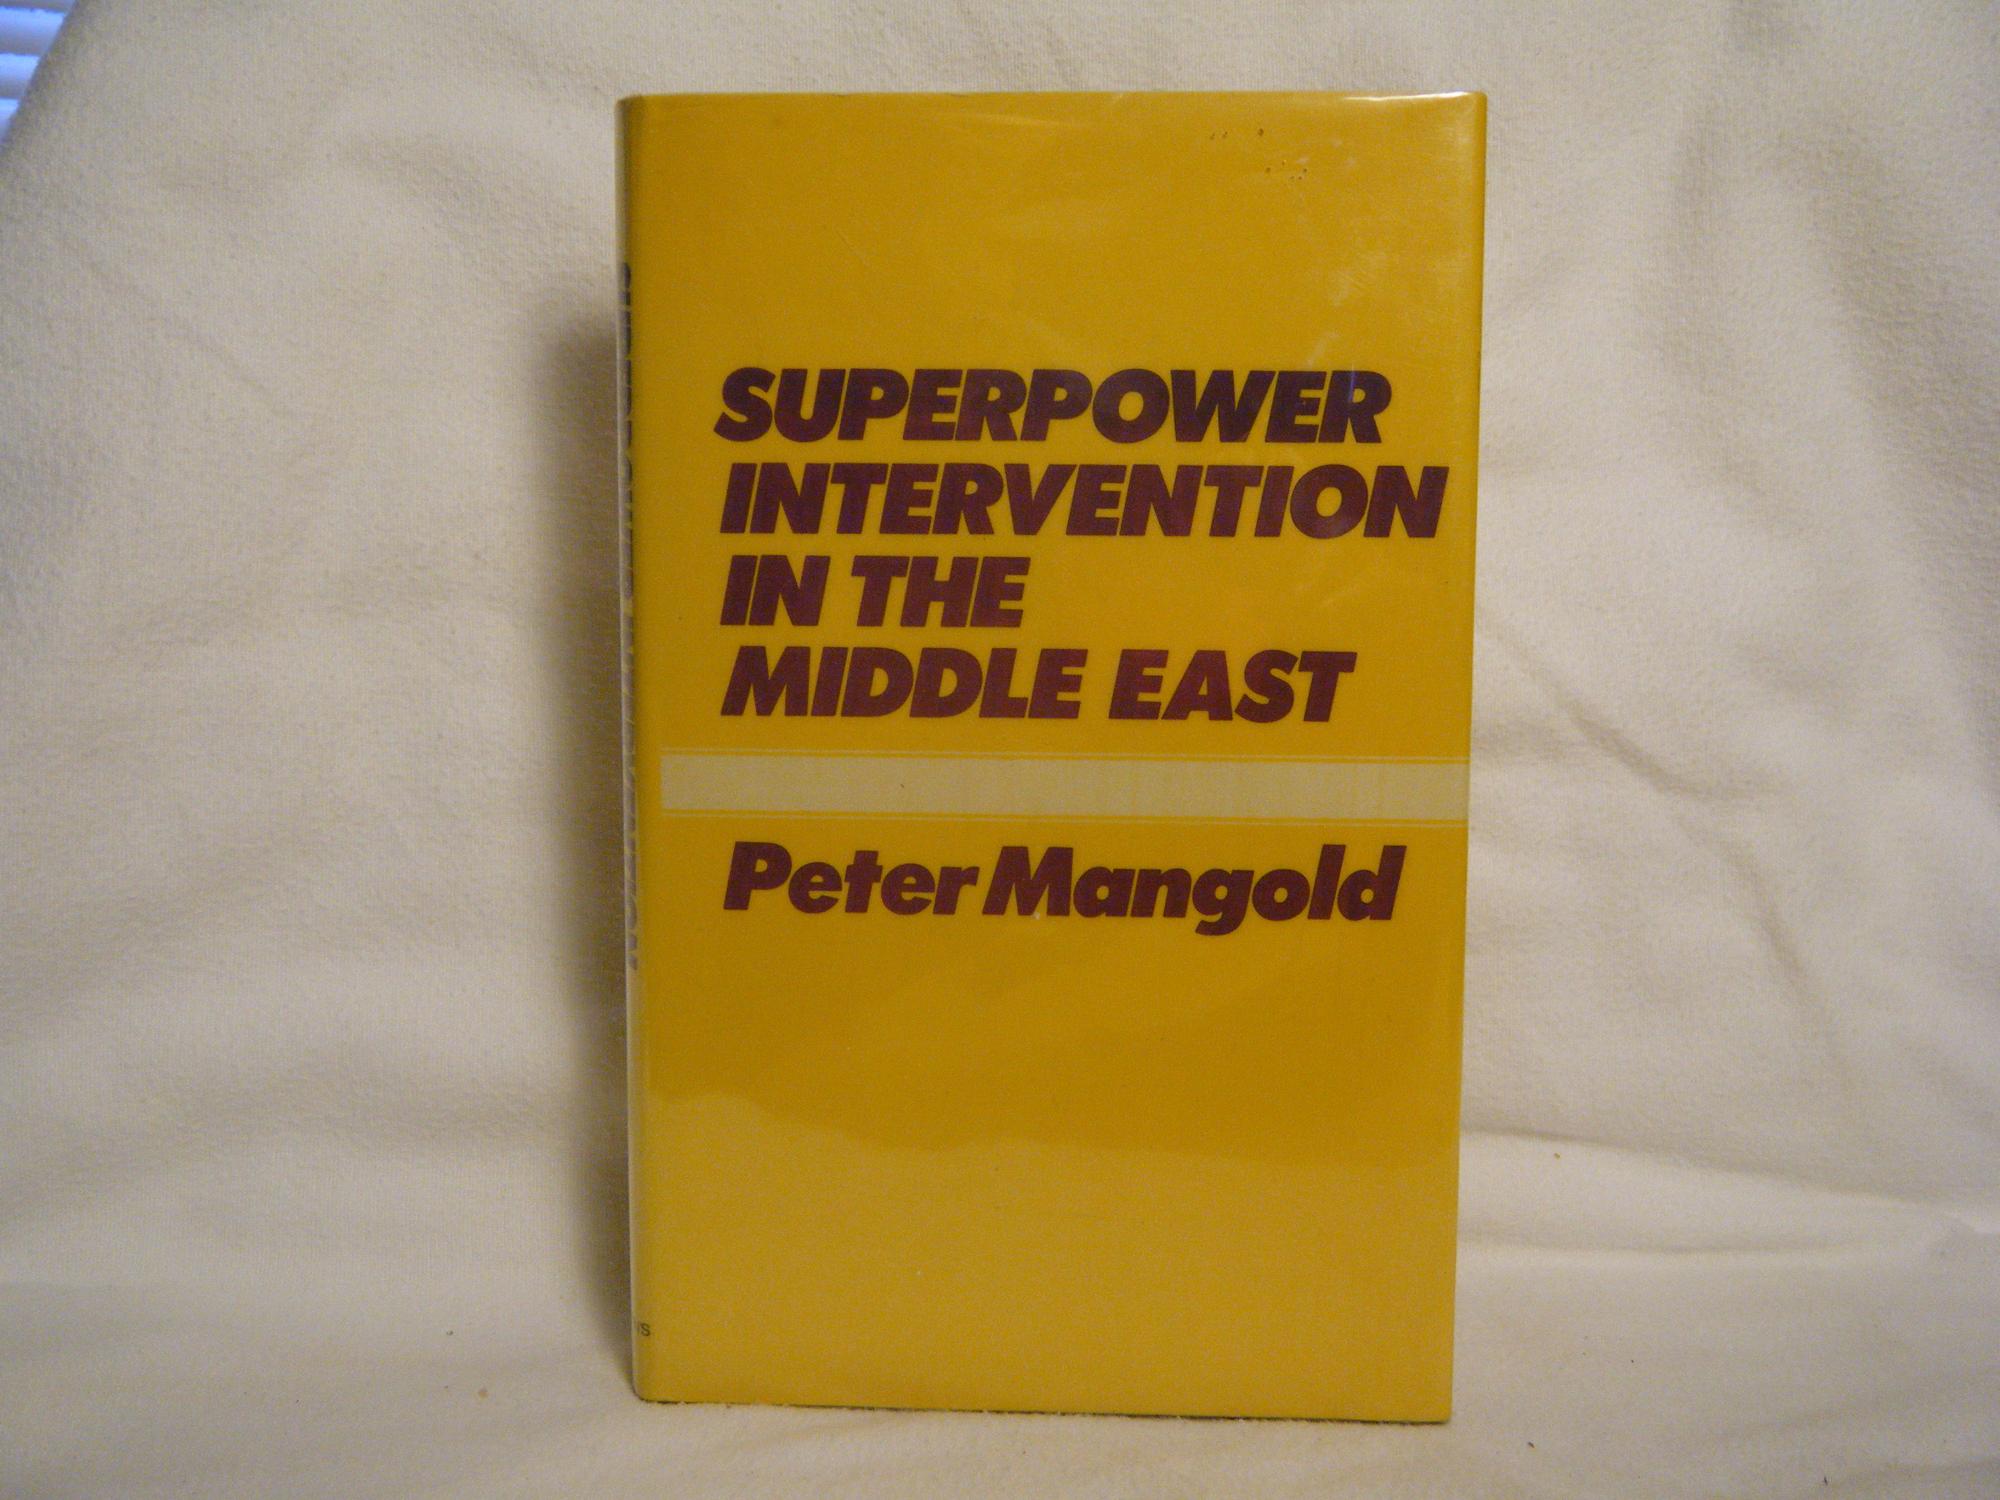 Superpower intervention in the Middle East - Mangold, Peter